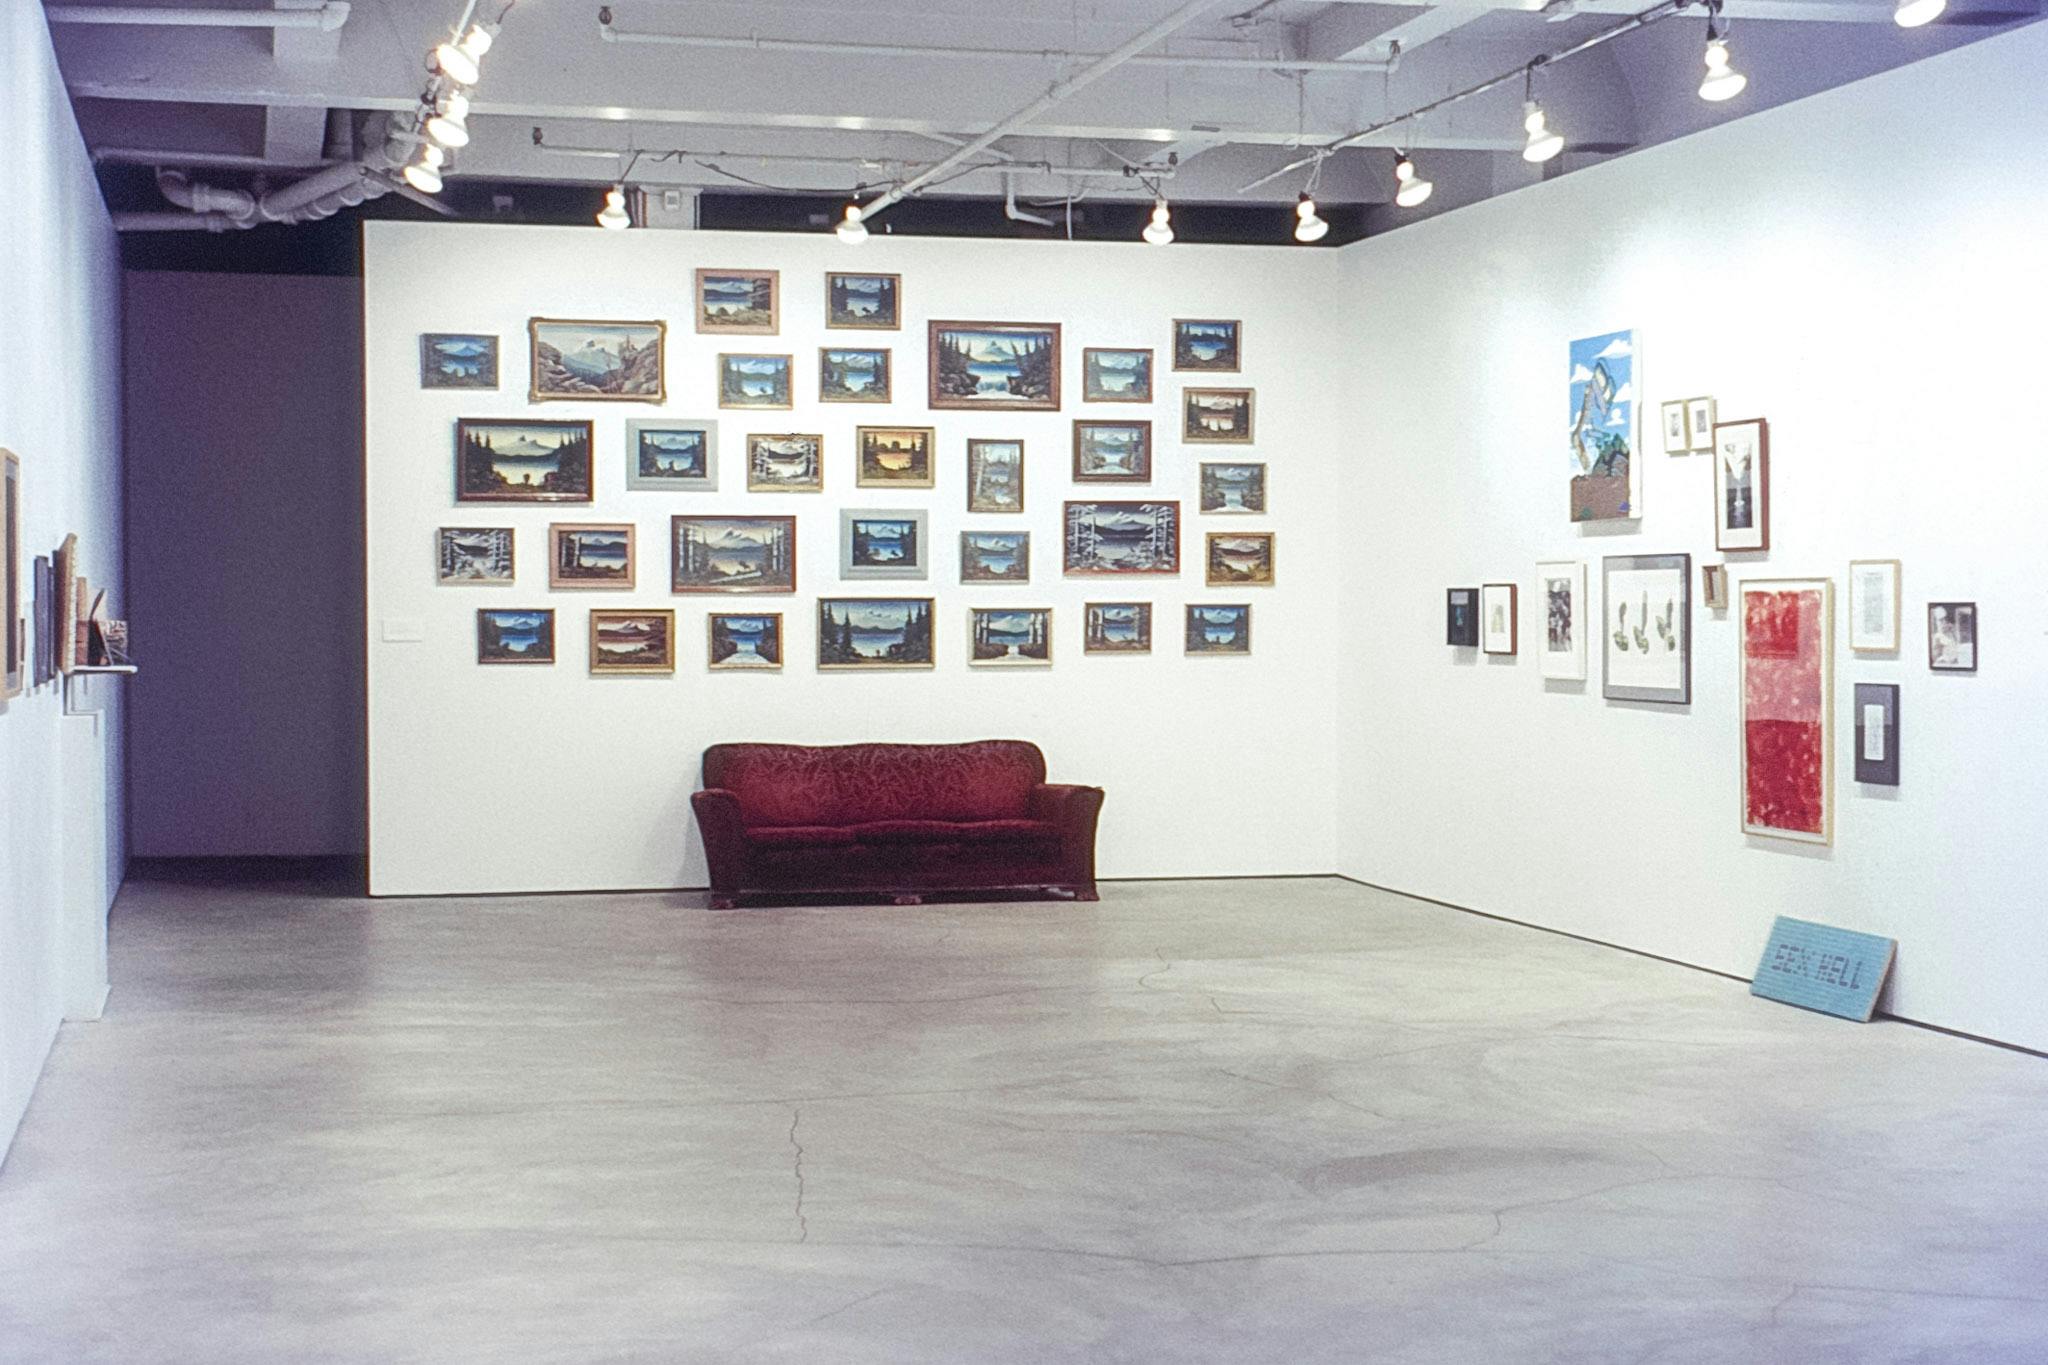 Three white walls and a shadowy hallway in a gallery. Dozens of artworks are mounted on the walls. The works on the back wall are landscapes, with a faded red velvet couch in front of them.